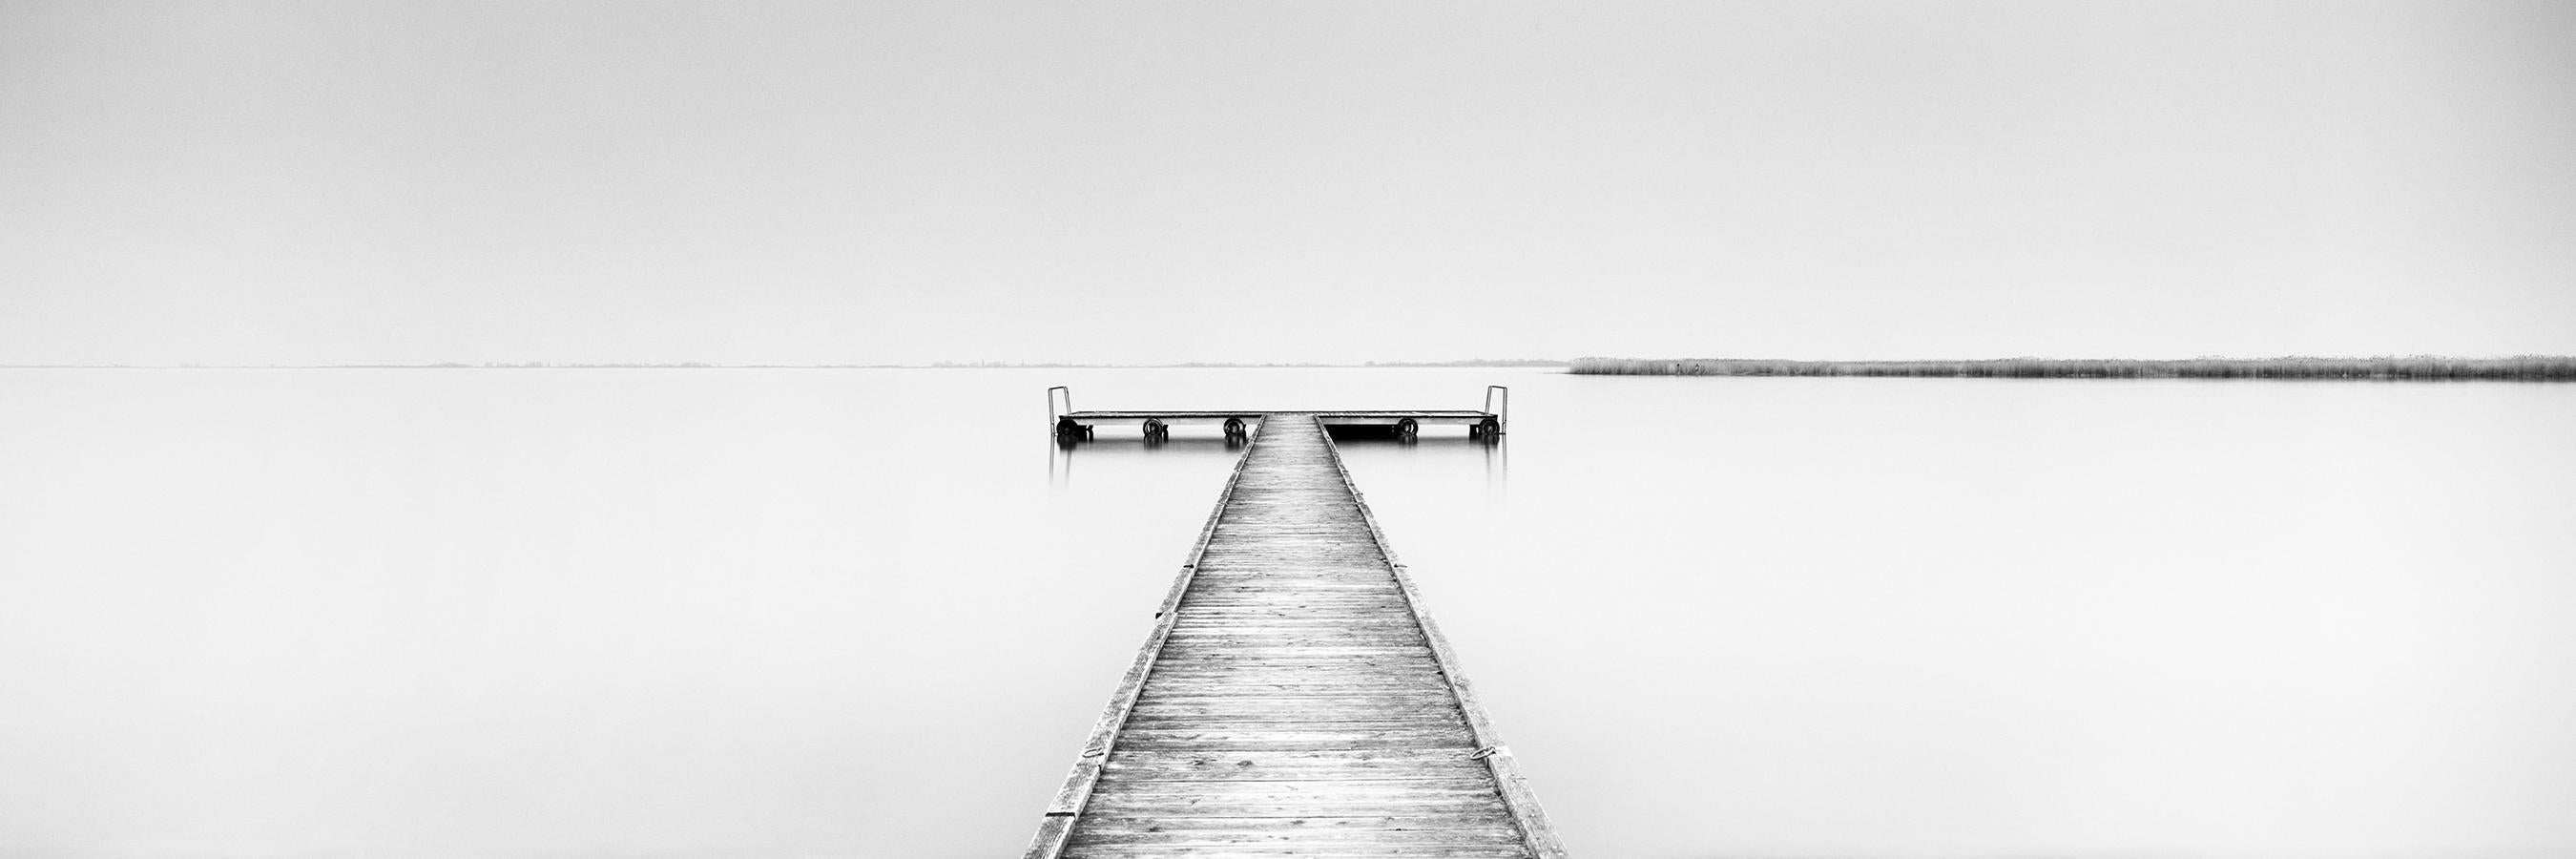 Gerald Berghammer Landscape Photograph - Wood Pier Panorama, minimalist black and white waterscape photography art print